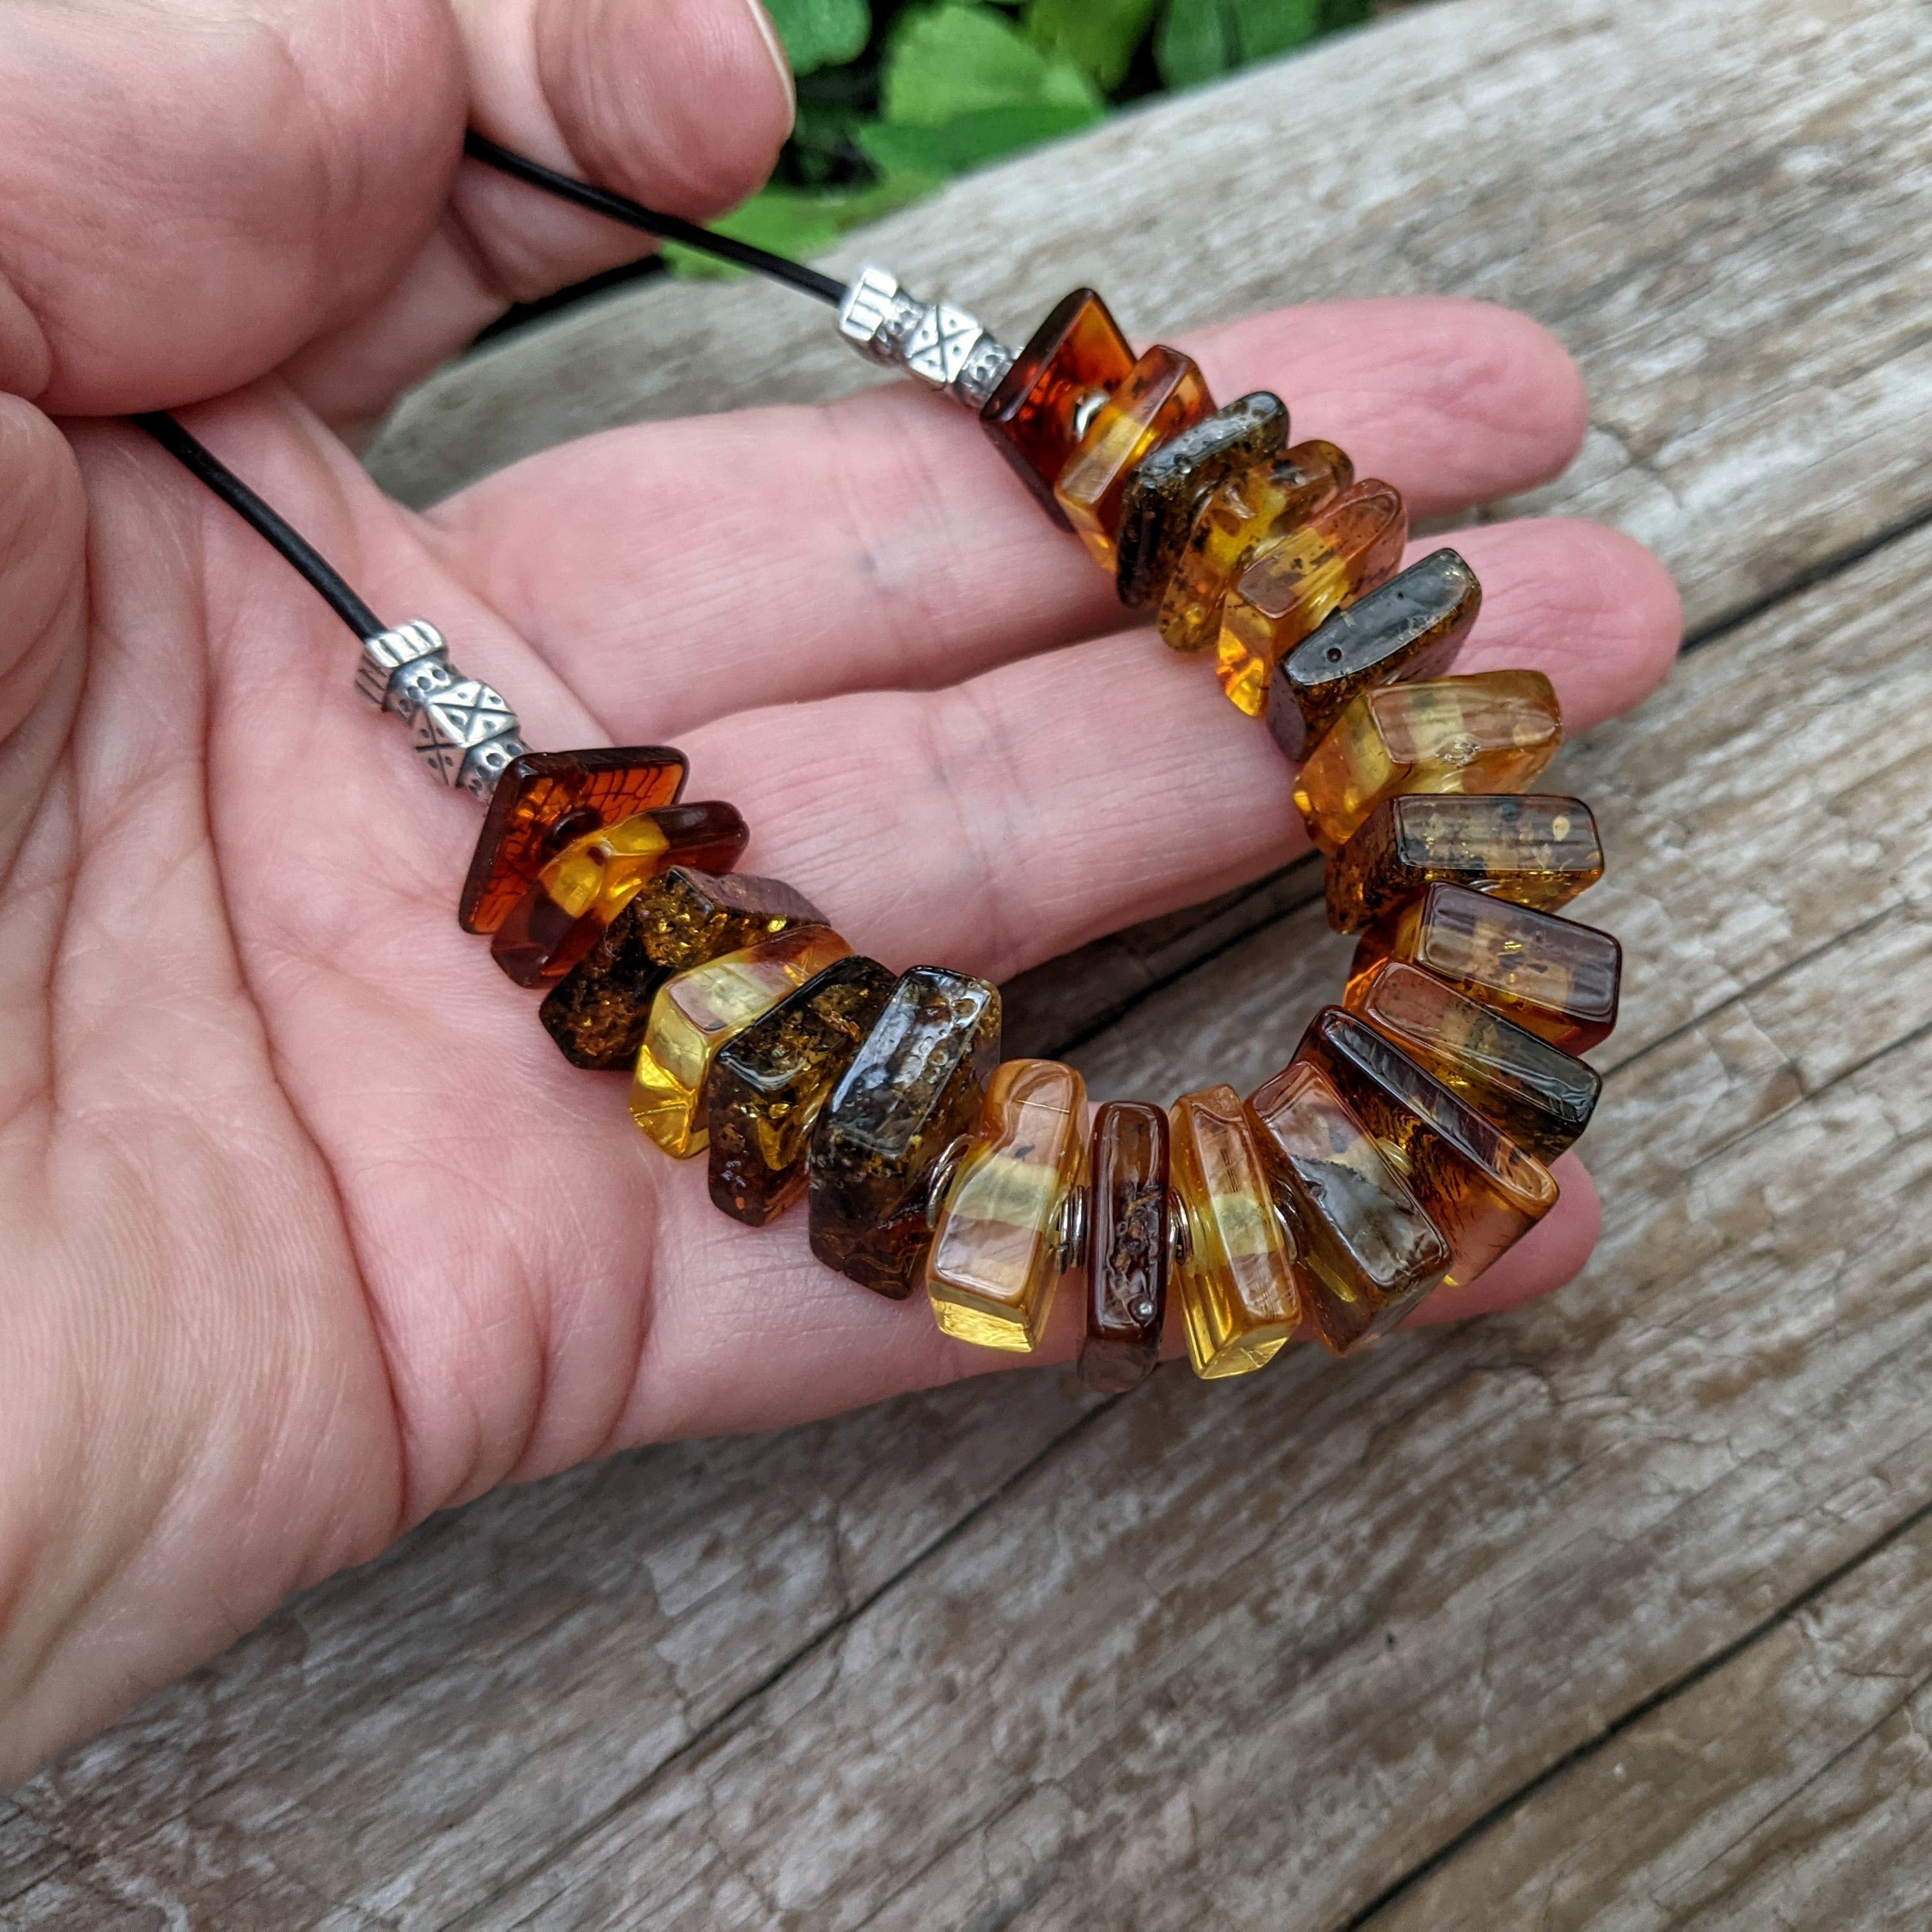 Real amber necklace. One of a kind unique amber necklace. Artistic artisan jewelry. Handcrafted by Aurora Creative Jewellery.